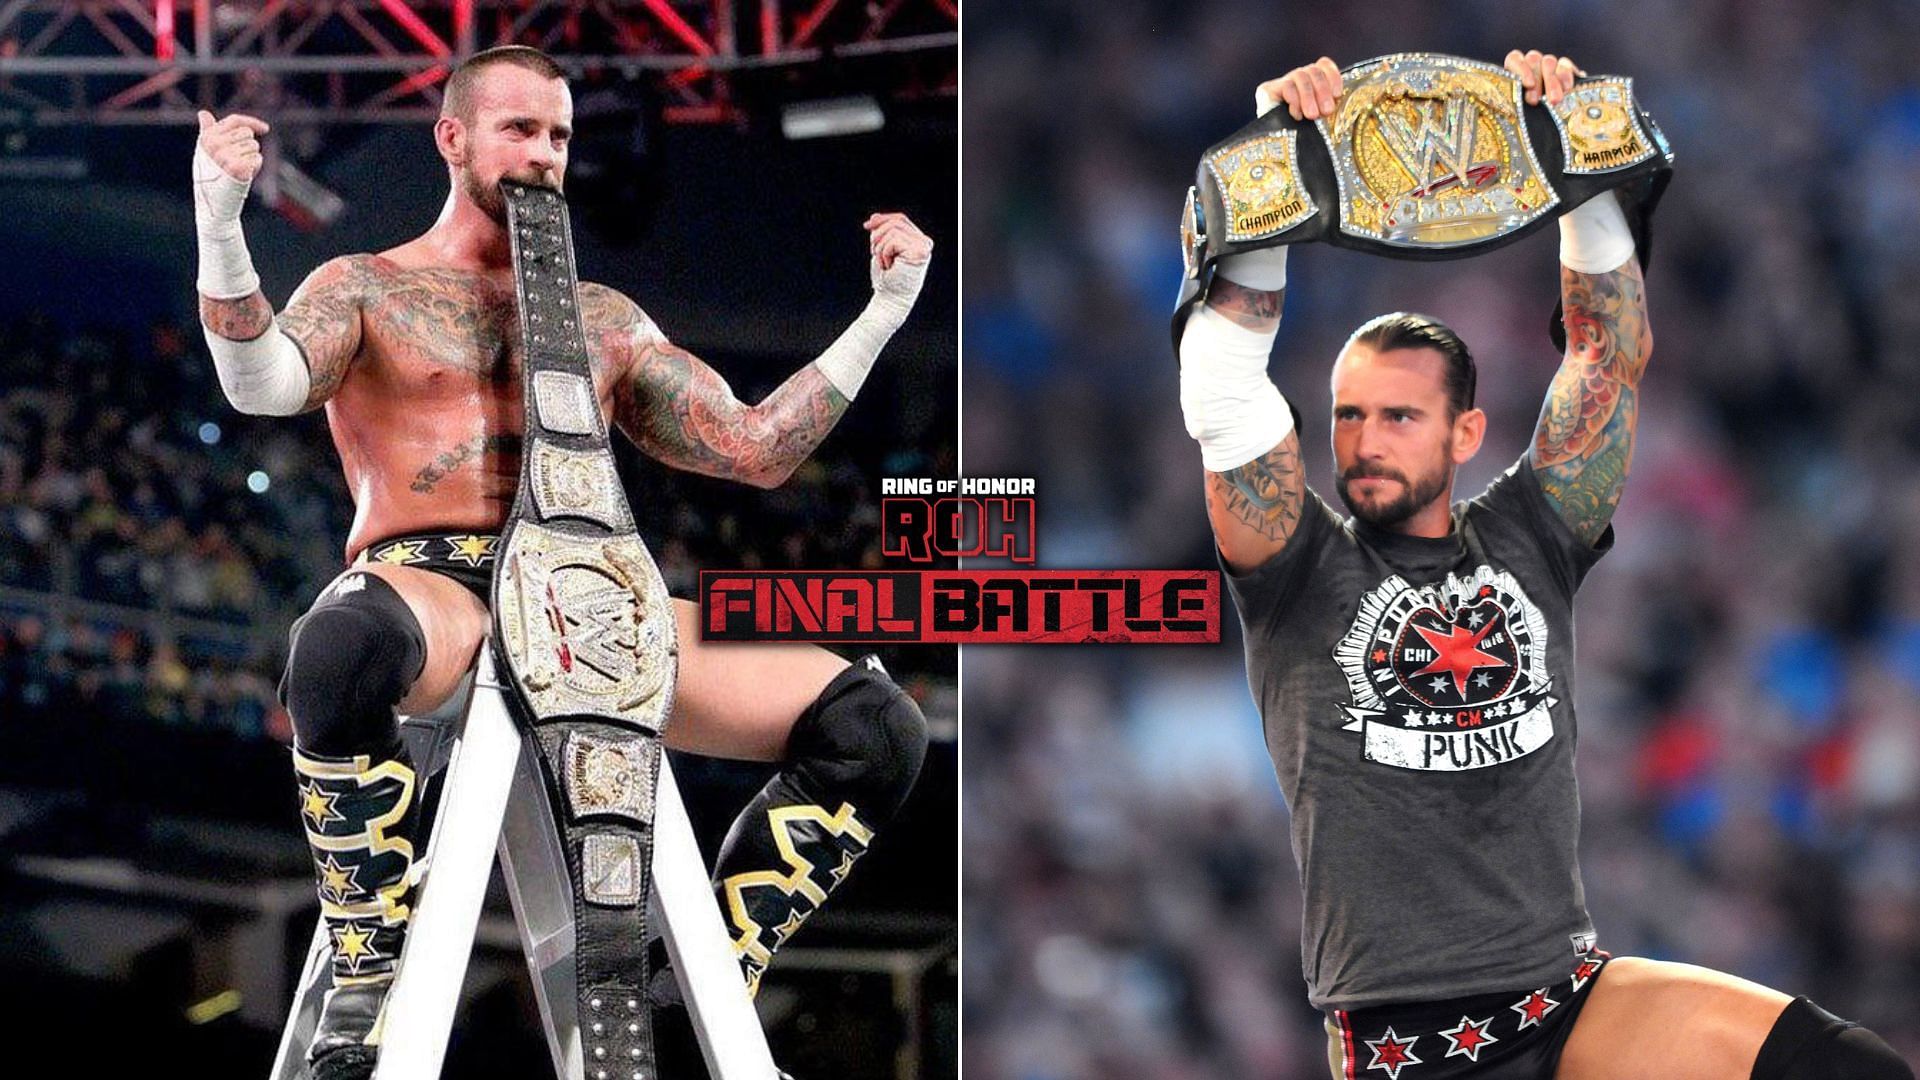 5time WWE Champion CM Punk namedropped during unique stipulation match